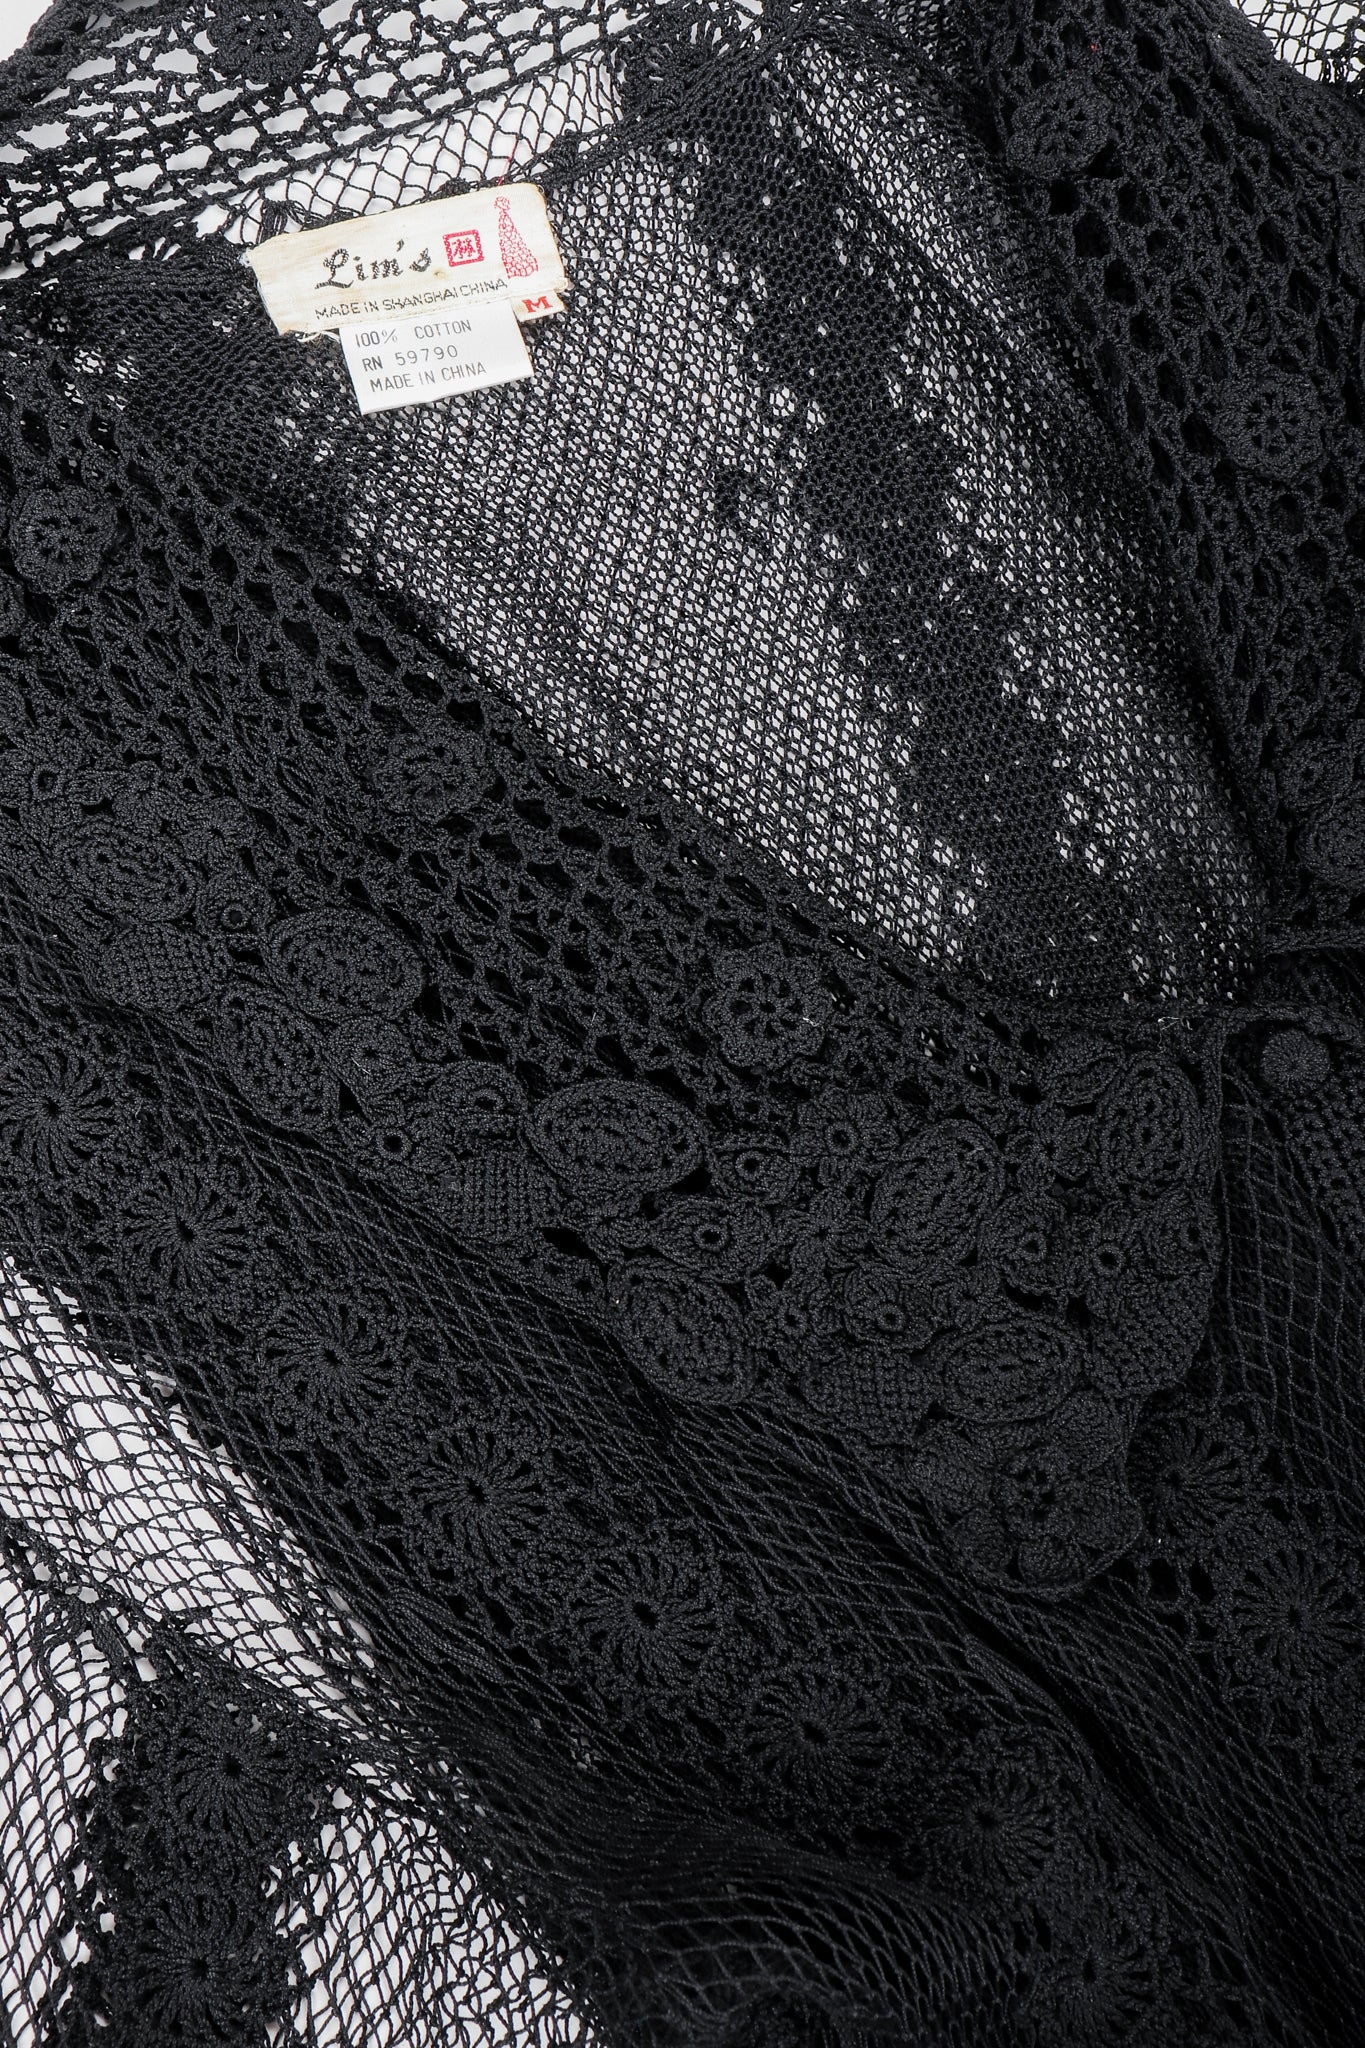 Vintage Lim's Sheer Crochet Lace Dress fabric detail at Recess Los Angeles